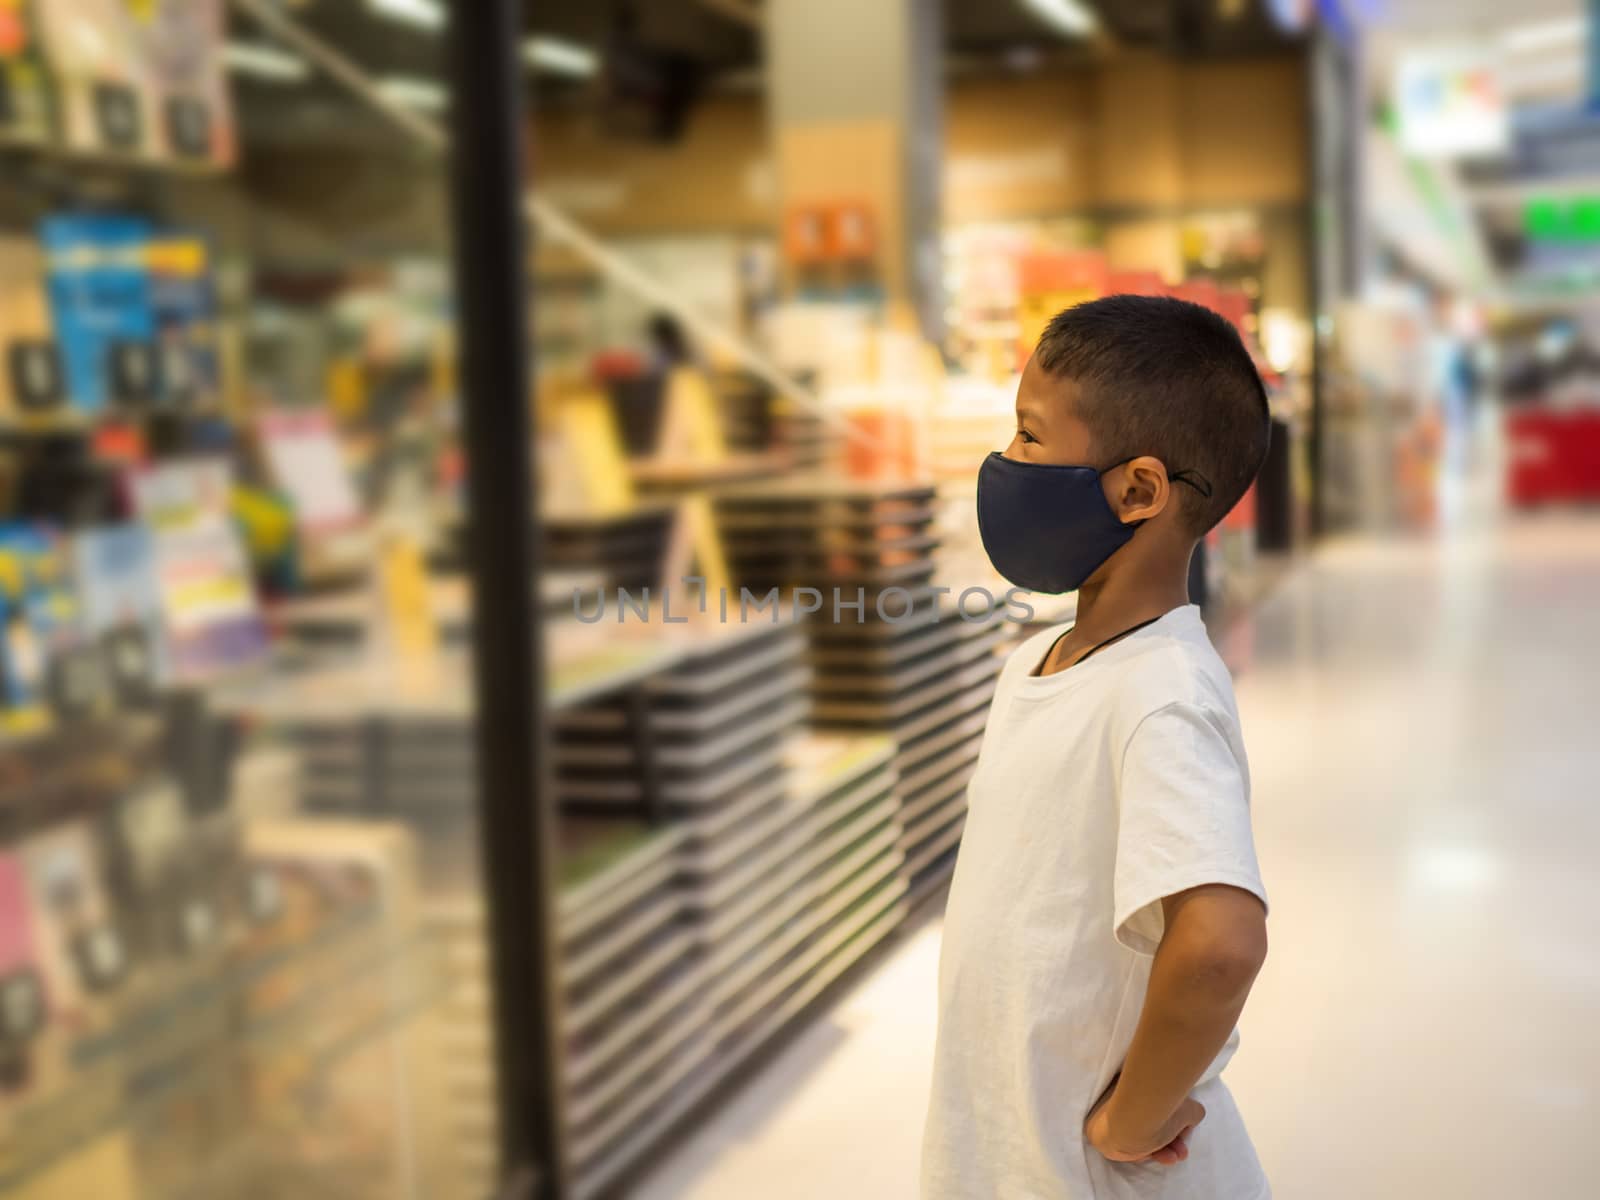 A boy wear a protective mask Looking at the showcase In a bookstore. Concept of life And protect yourself from the coronavirus outbreak.